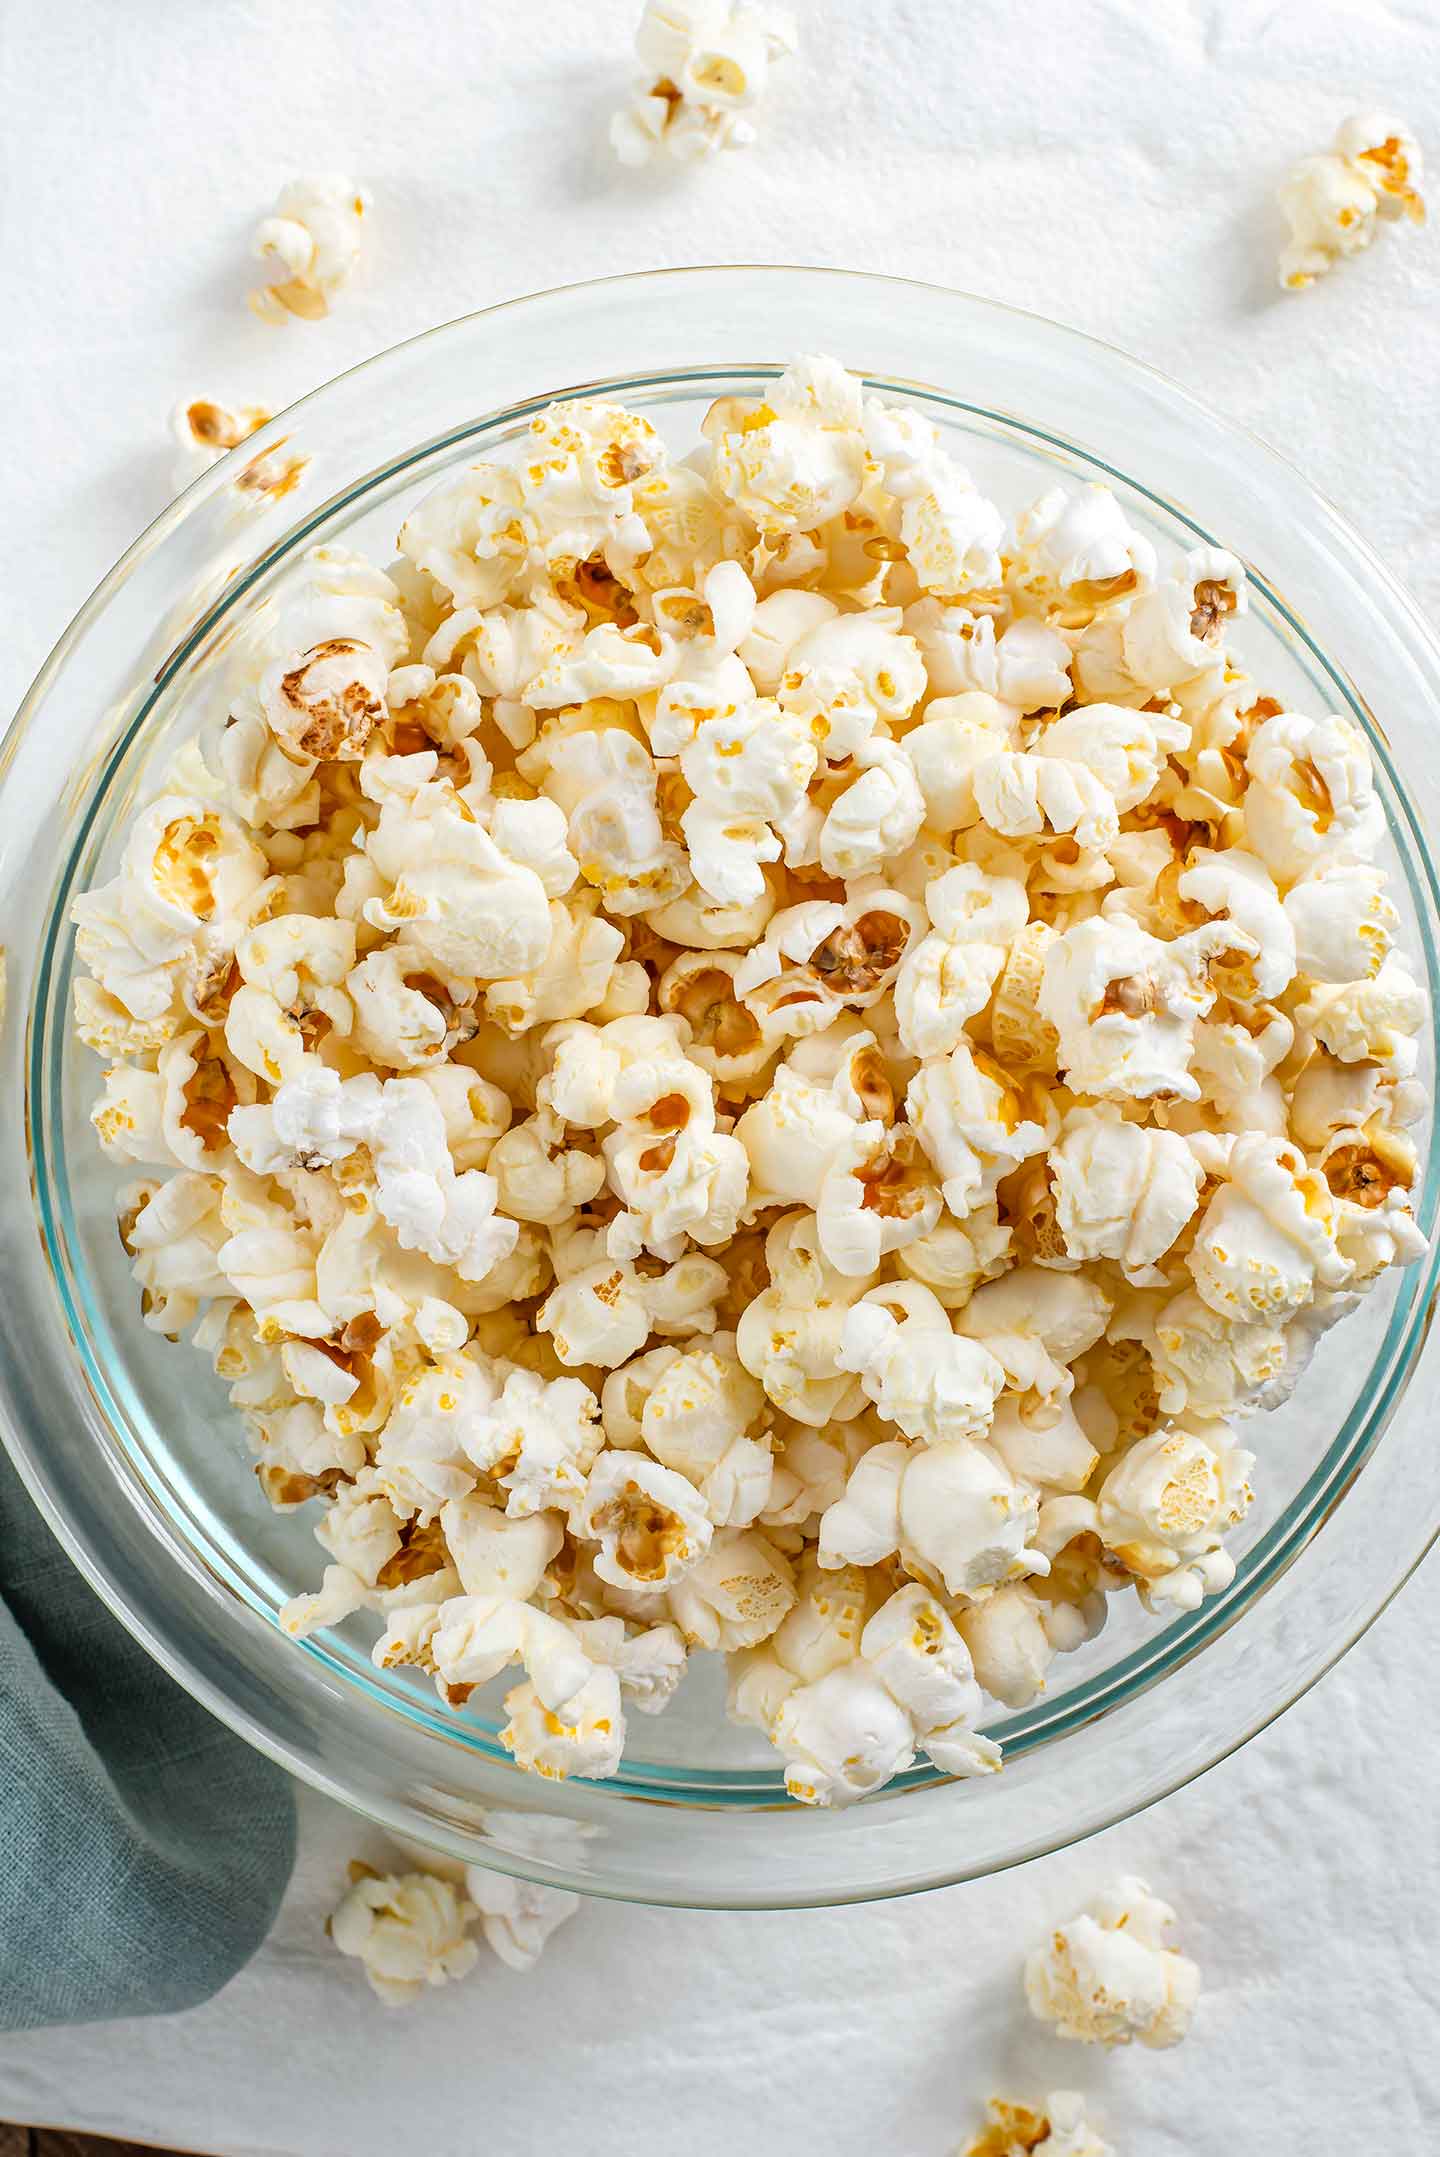 https://tastythriftytimely.com/wp-content/uploads/2022/03/Stovetop-Popcorn-Better-Than-Movie-Theatre-4-1.jpg